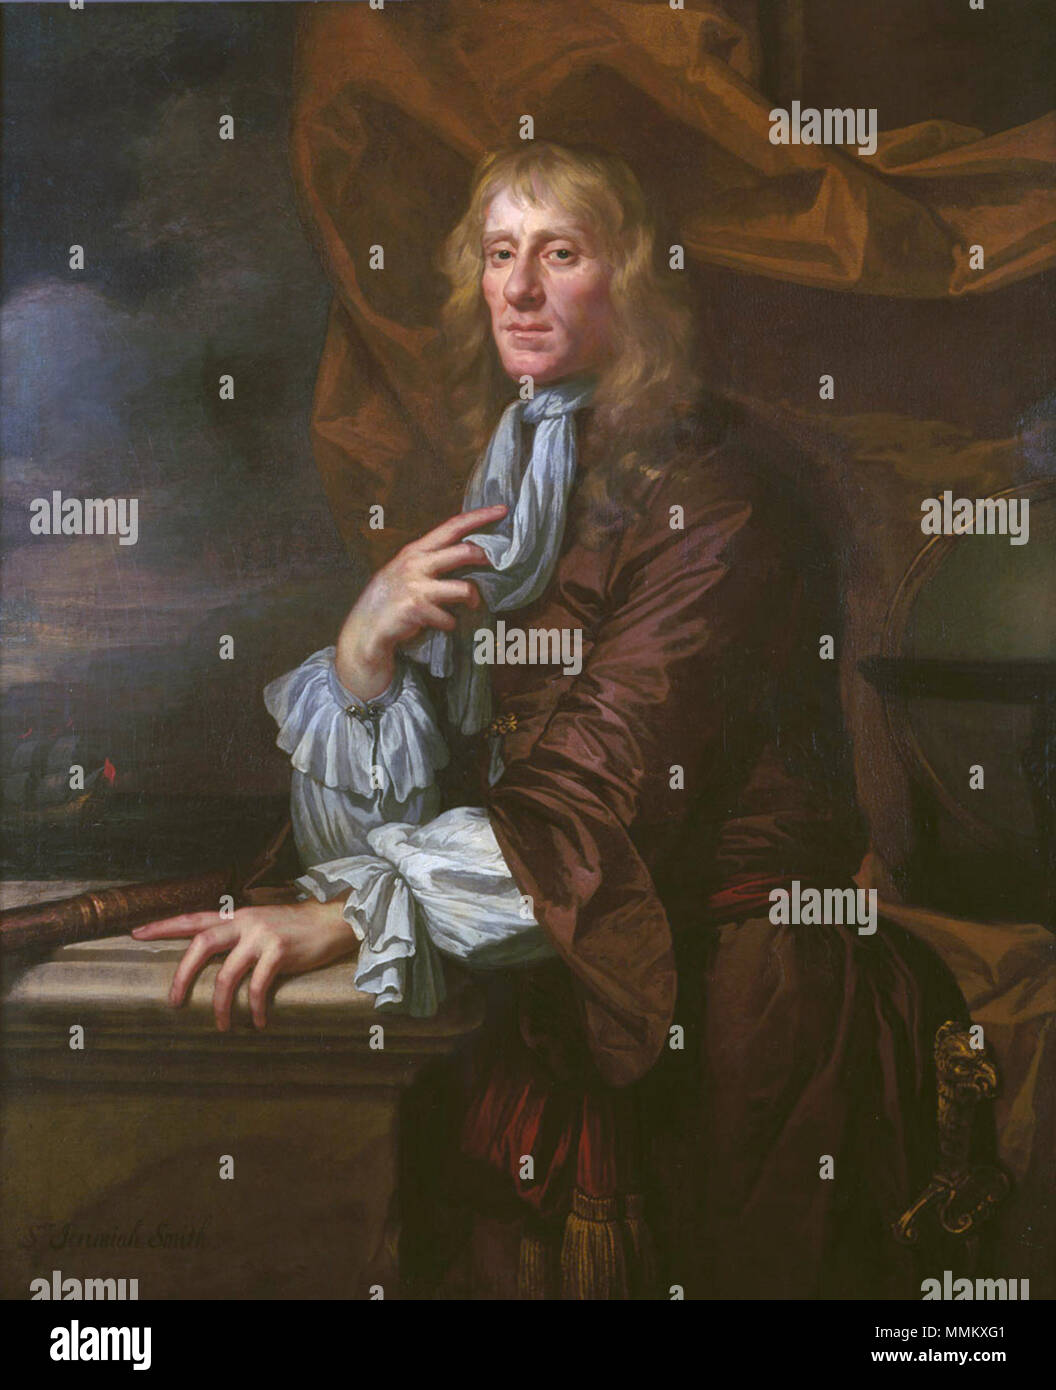 .  English: A three-quarter-length portrait to left in a brown silk coat fastened with gold clips and with a gold-tasselled red sash round his waist. He is leaning forward onto a stone plinth, his right hand fingering his neck cloth. His telescope rests on the plinth in front of him, and there is a ship beyond. In the right background is a globe and brown draperies.  Jeremiah Smith (d. 1675)  *oil on canvas  *127 x 101.5 cm  *1666  *inscribed b.l.: Sr Jeremiah Smith Sir Jeremiah Smith Stock Photo